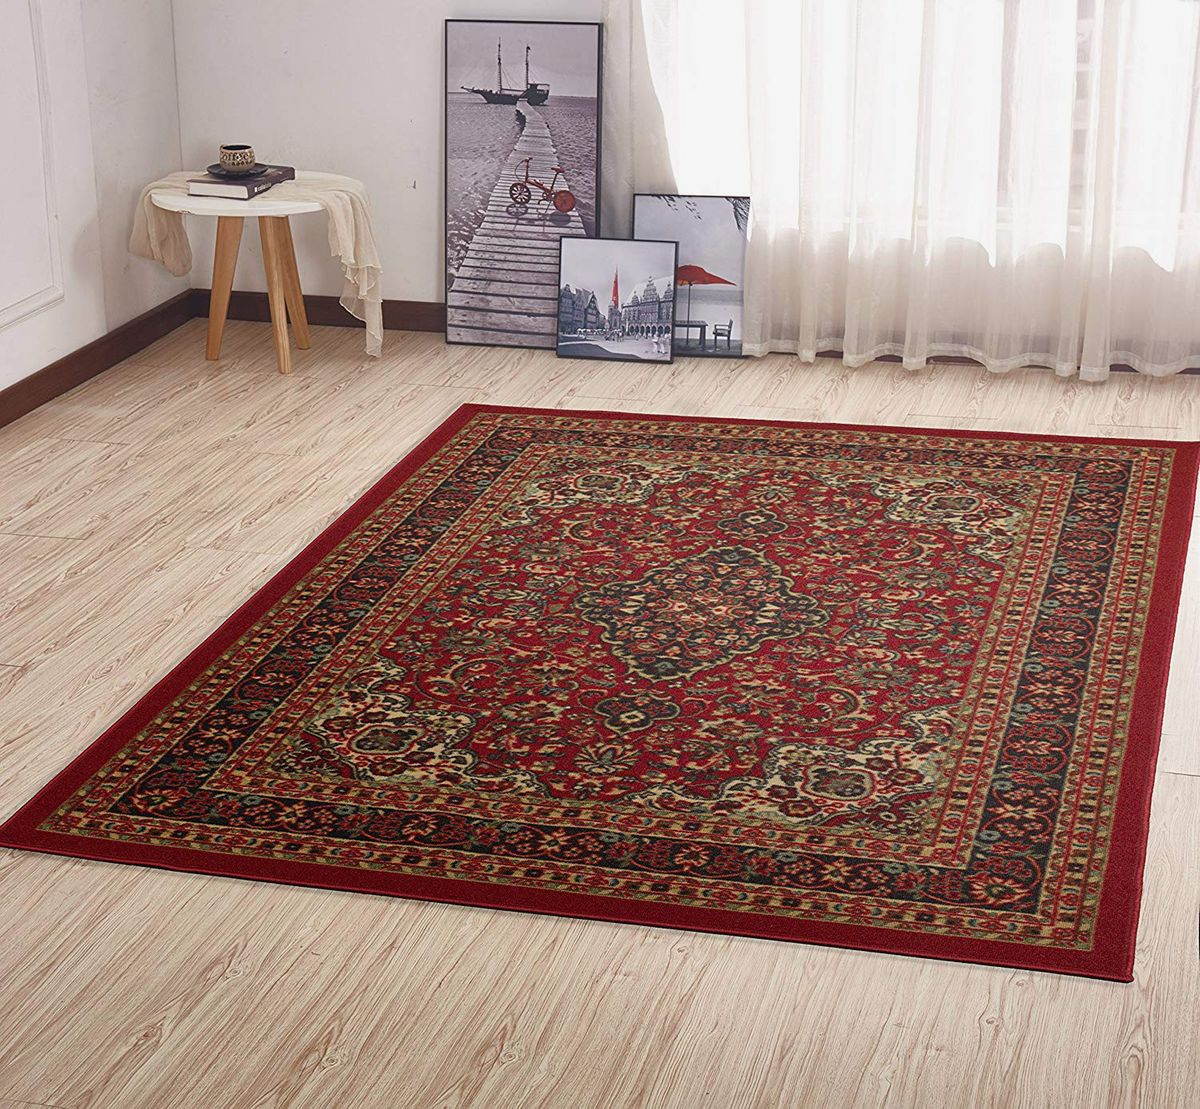 Bedroom Rugs Vintage Rug Turkish Rug 11880 Decorative Entry Carpet 85x29 inches Brown Rug Home Decor Rug Office Rug Accent Carpet